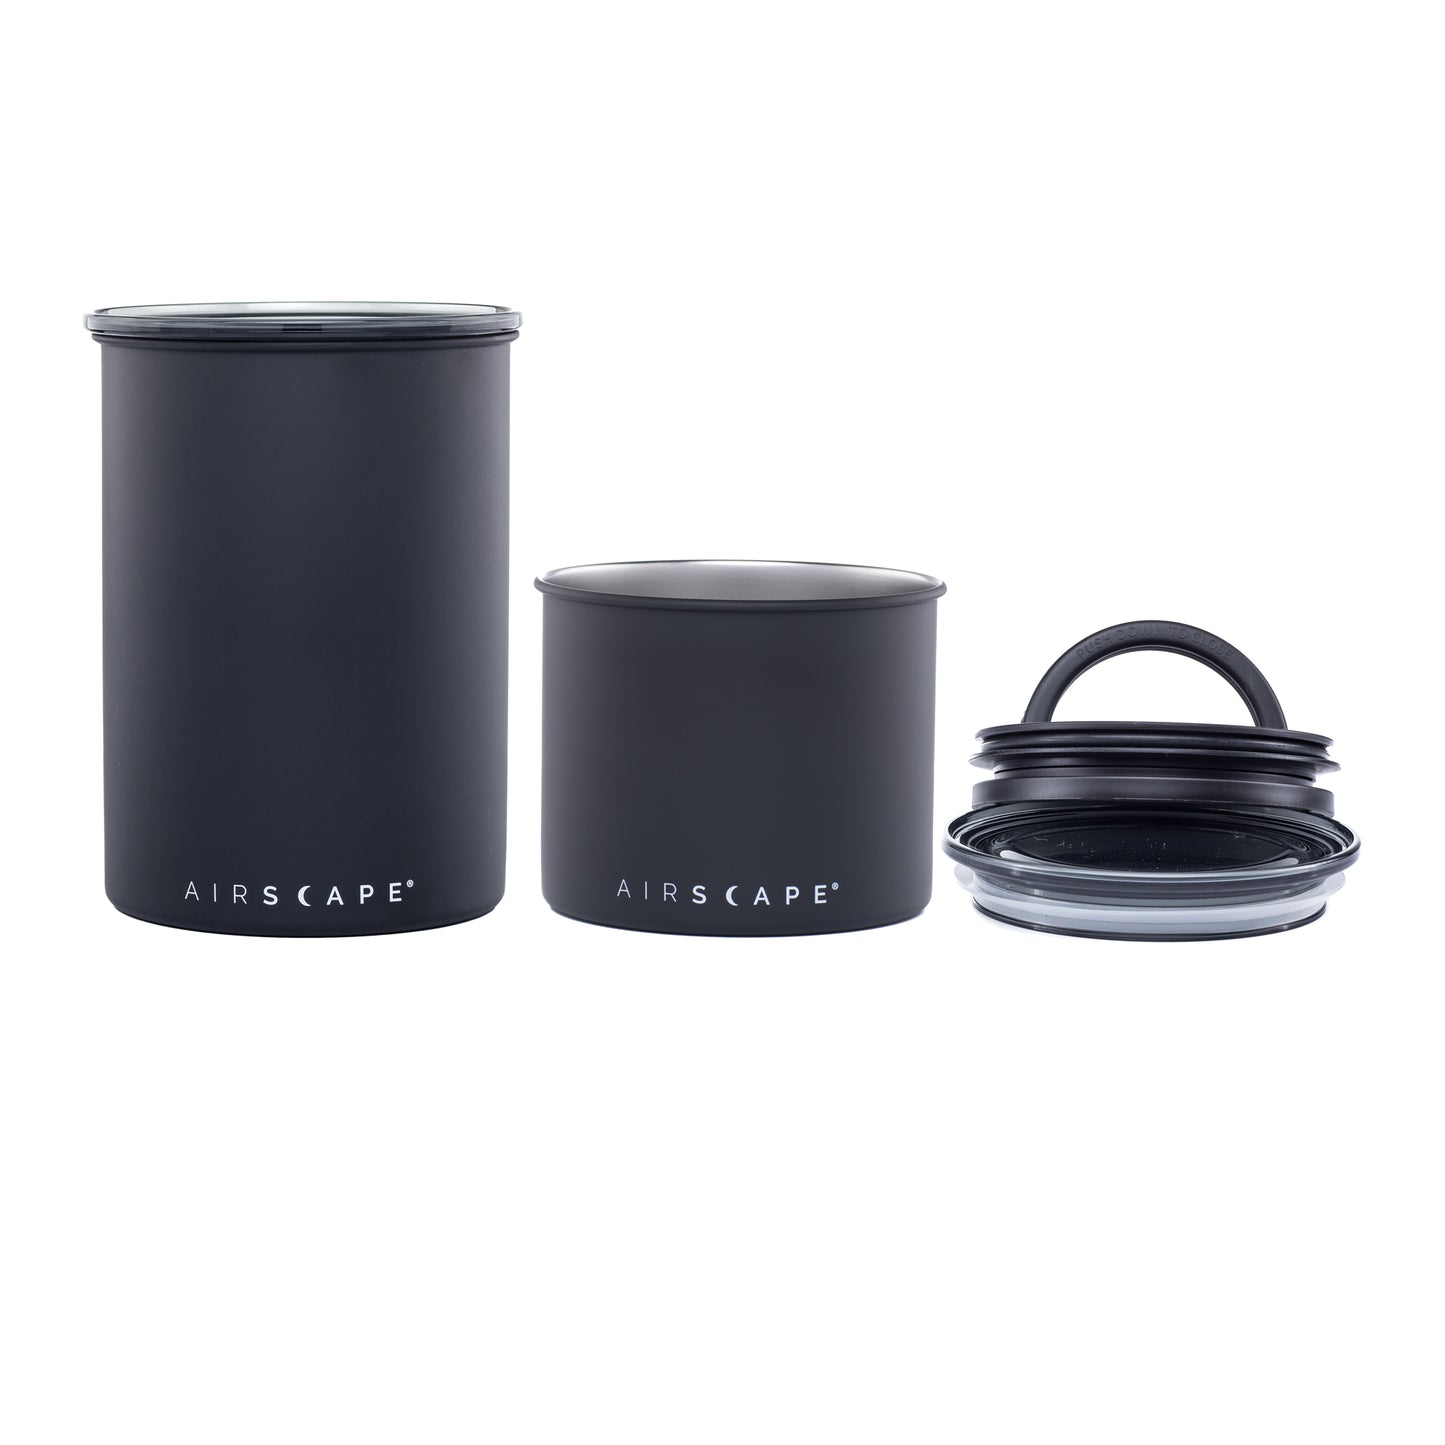 Airscape Wood Buffalo Coffee Canister